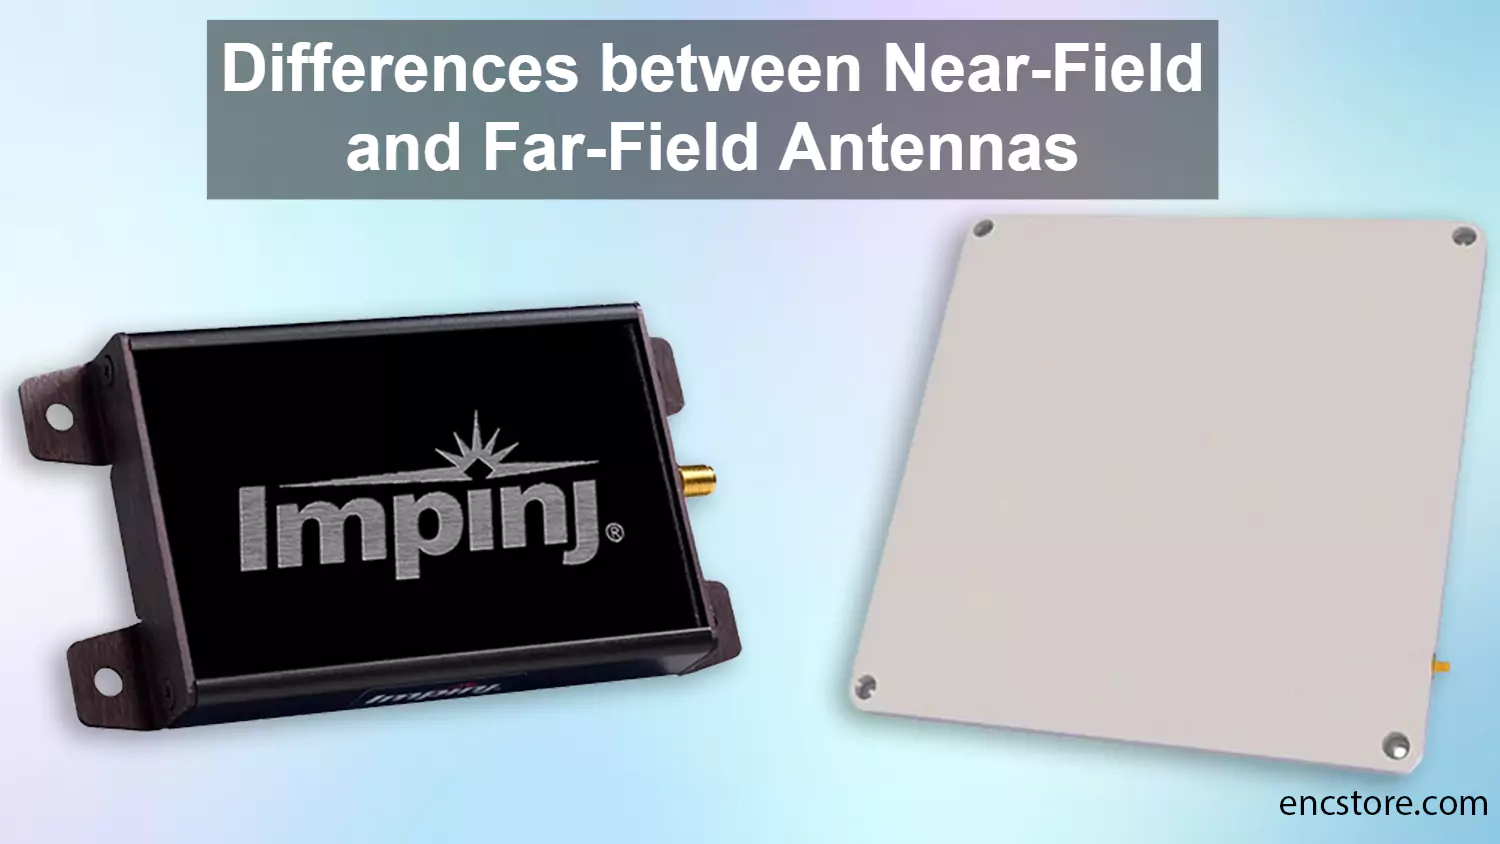 Differences between Near-Field and Far-Field Antennas